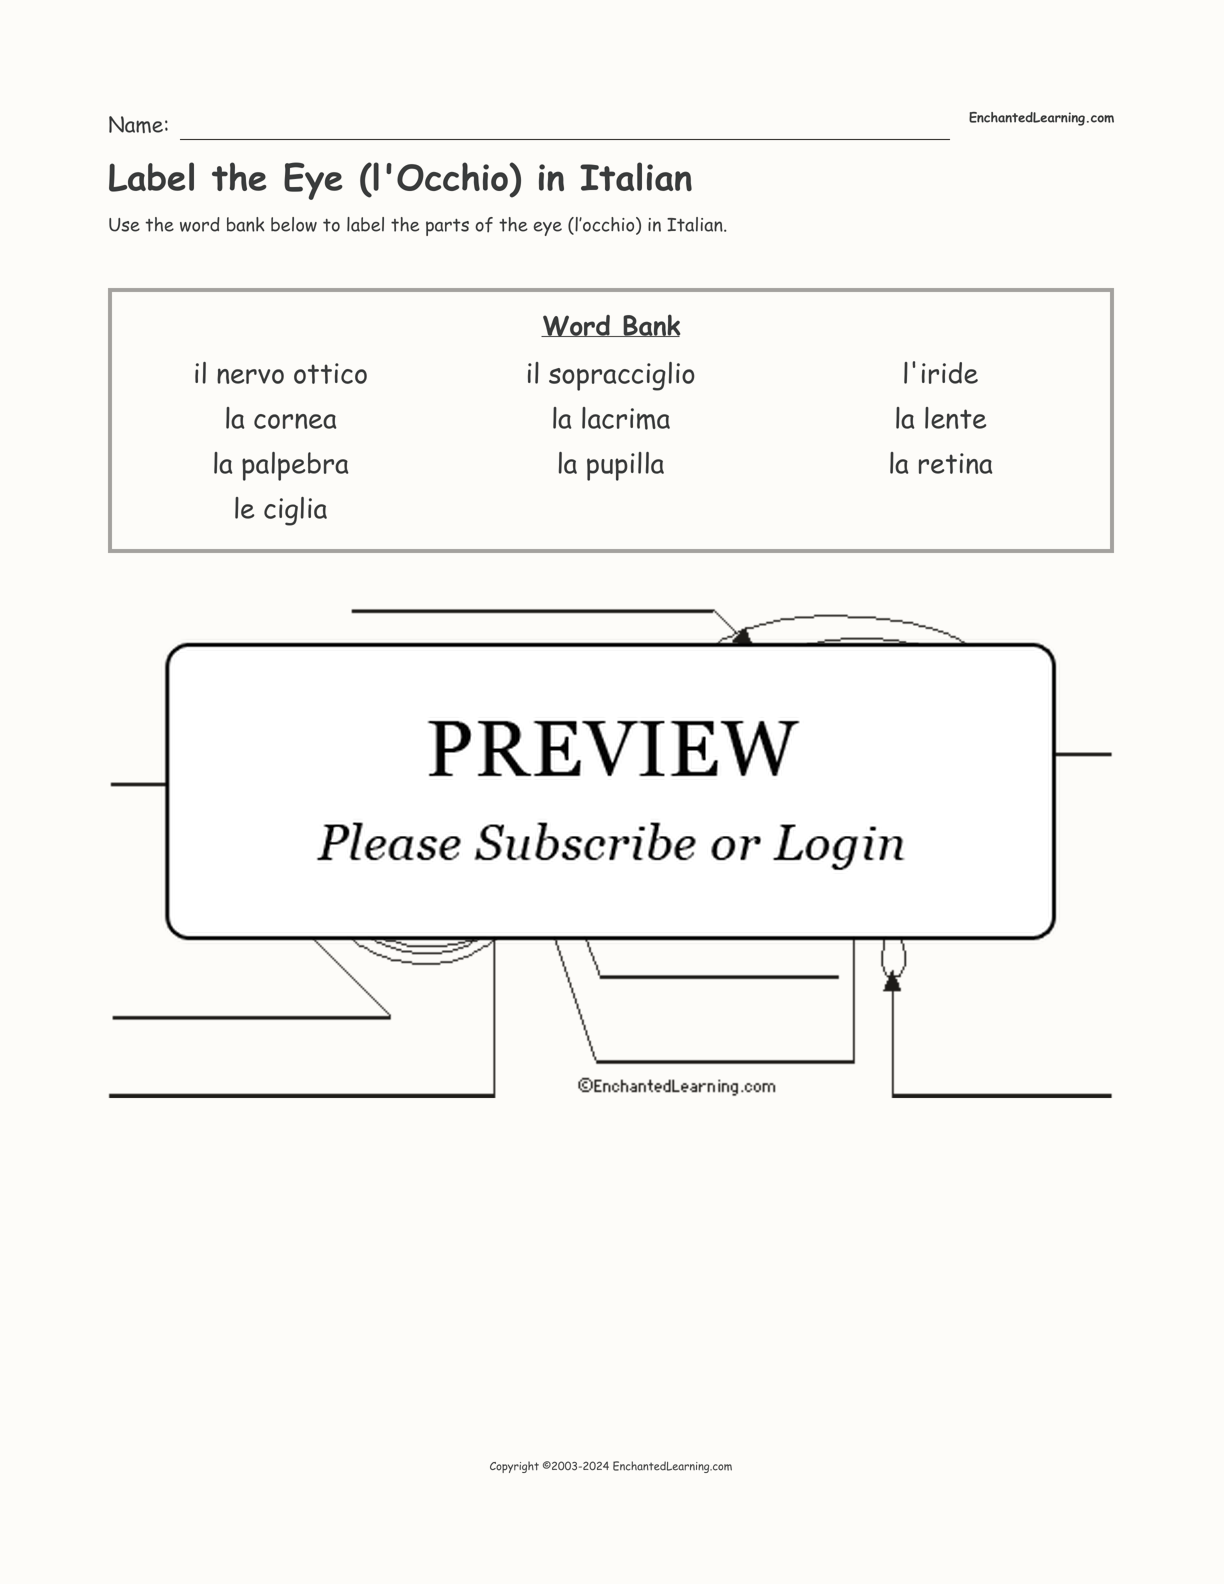 Label the Eye (l'Occhio) in Italian interactive worksheet page 1